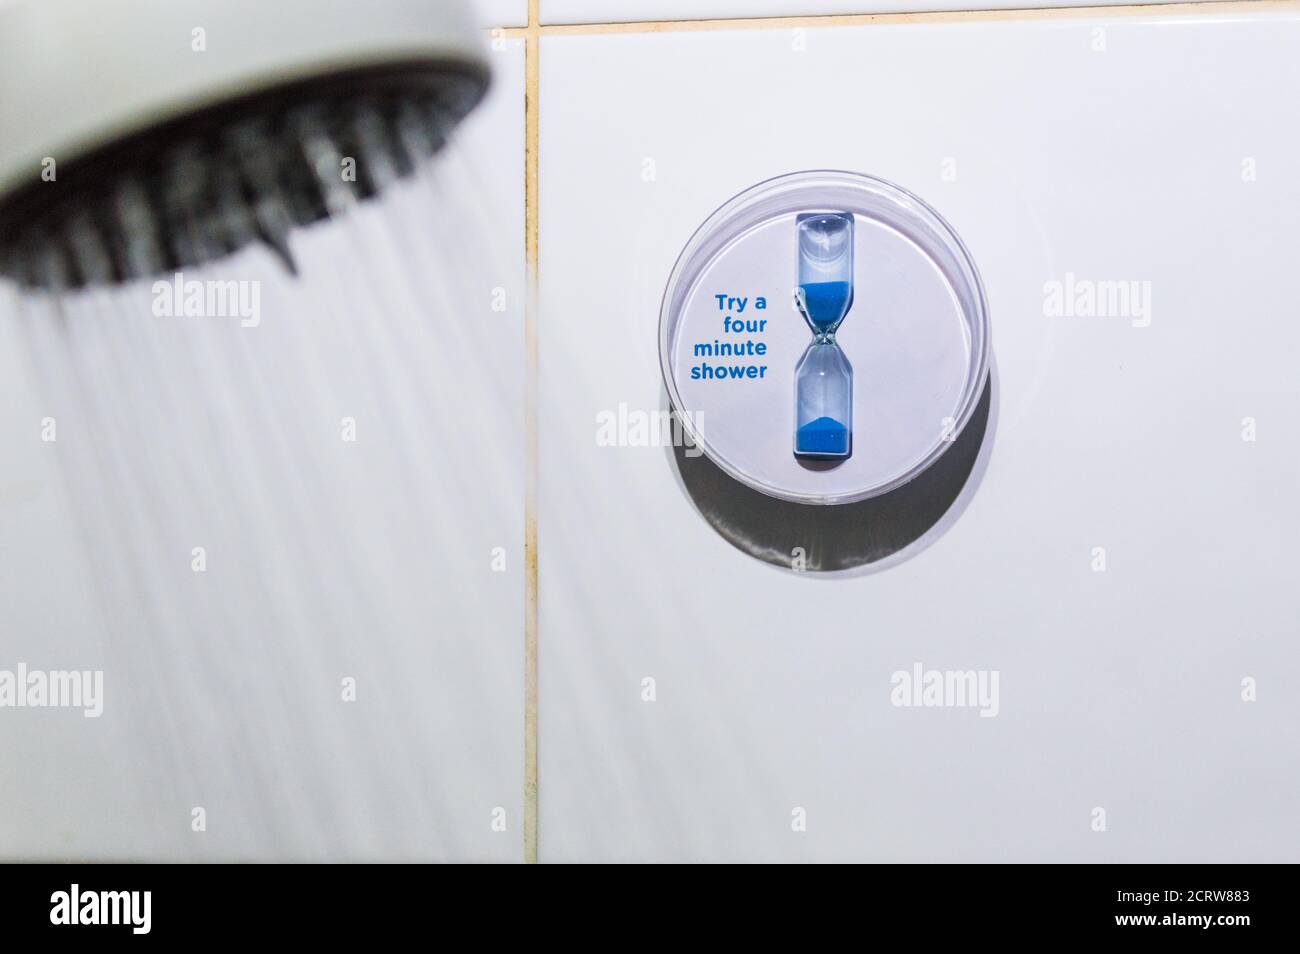 Save water four minute shower timer and shower head with water flowing Stock Photo